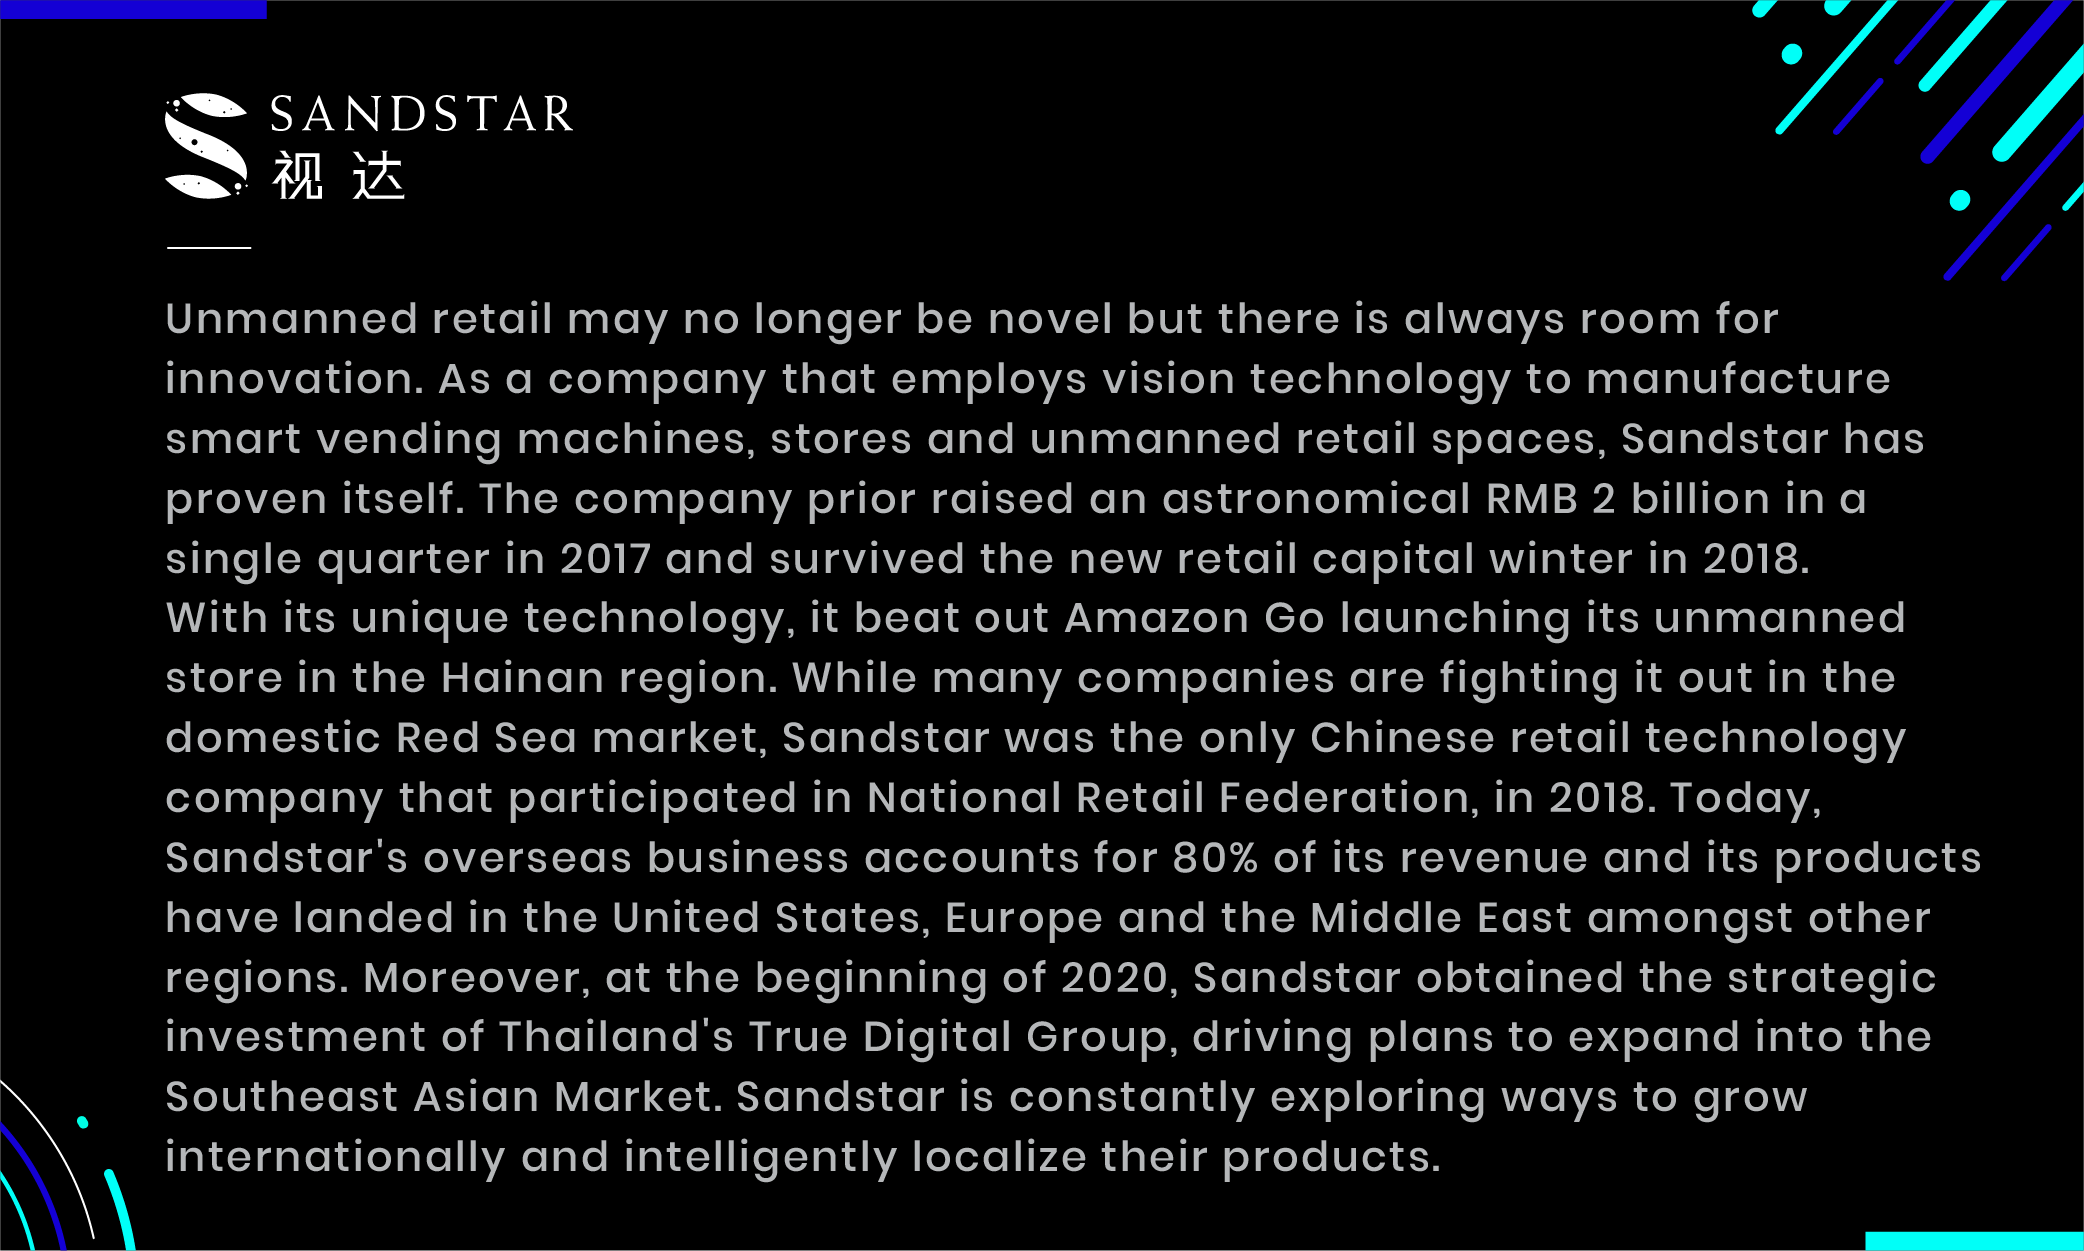 Sandstar unmanned retail smart vending machines stores united states middle east europe true digital group investment